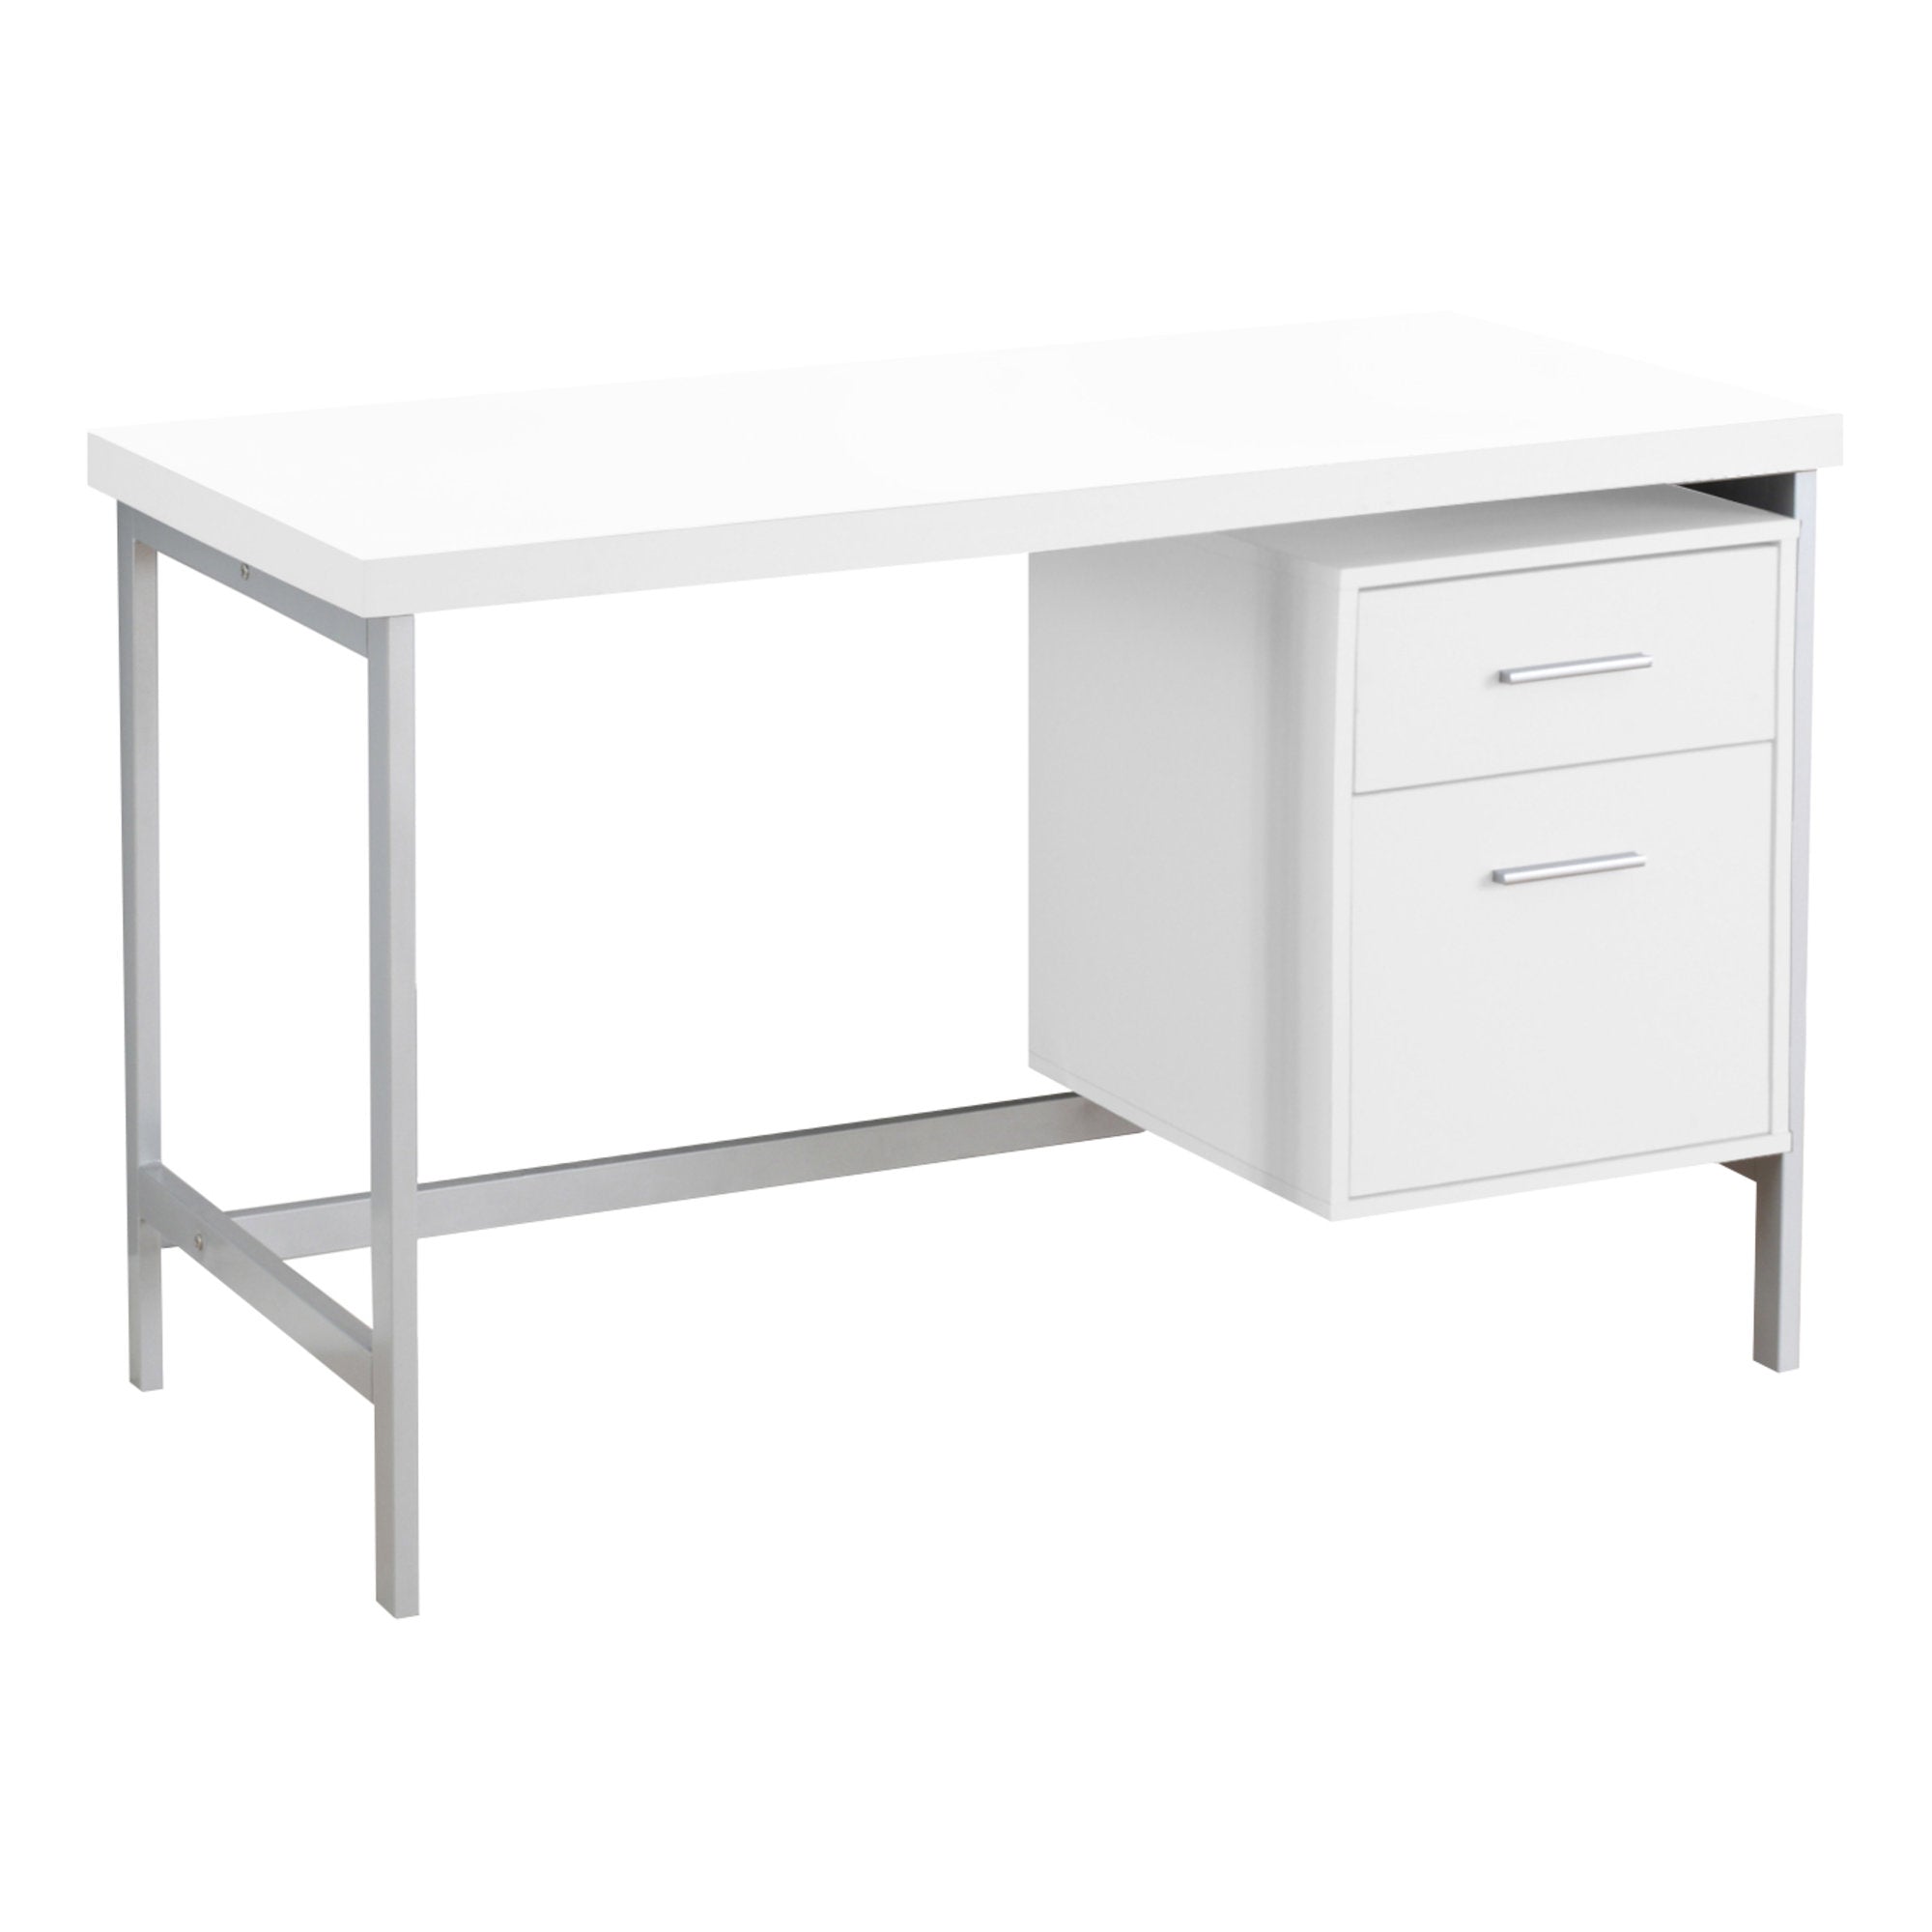 MN-227149    Computer Desk, Home Office, Laptop, Left, Right Set-Up, Storage Drawers, 48"L, Metal, Laminate, White, Contemporary, Modern